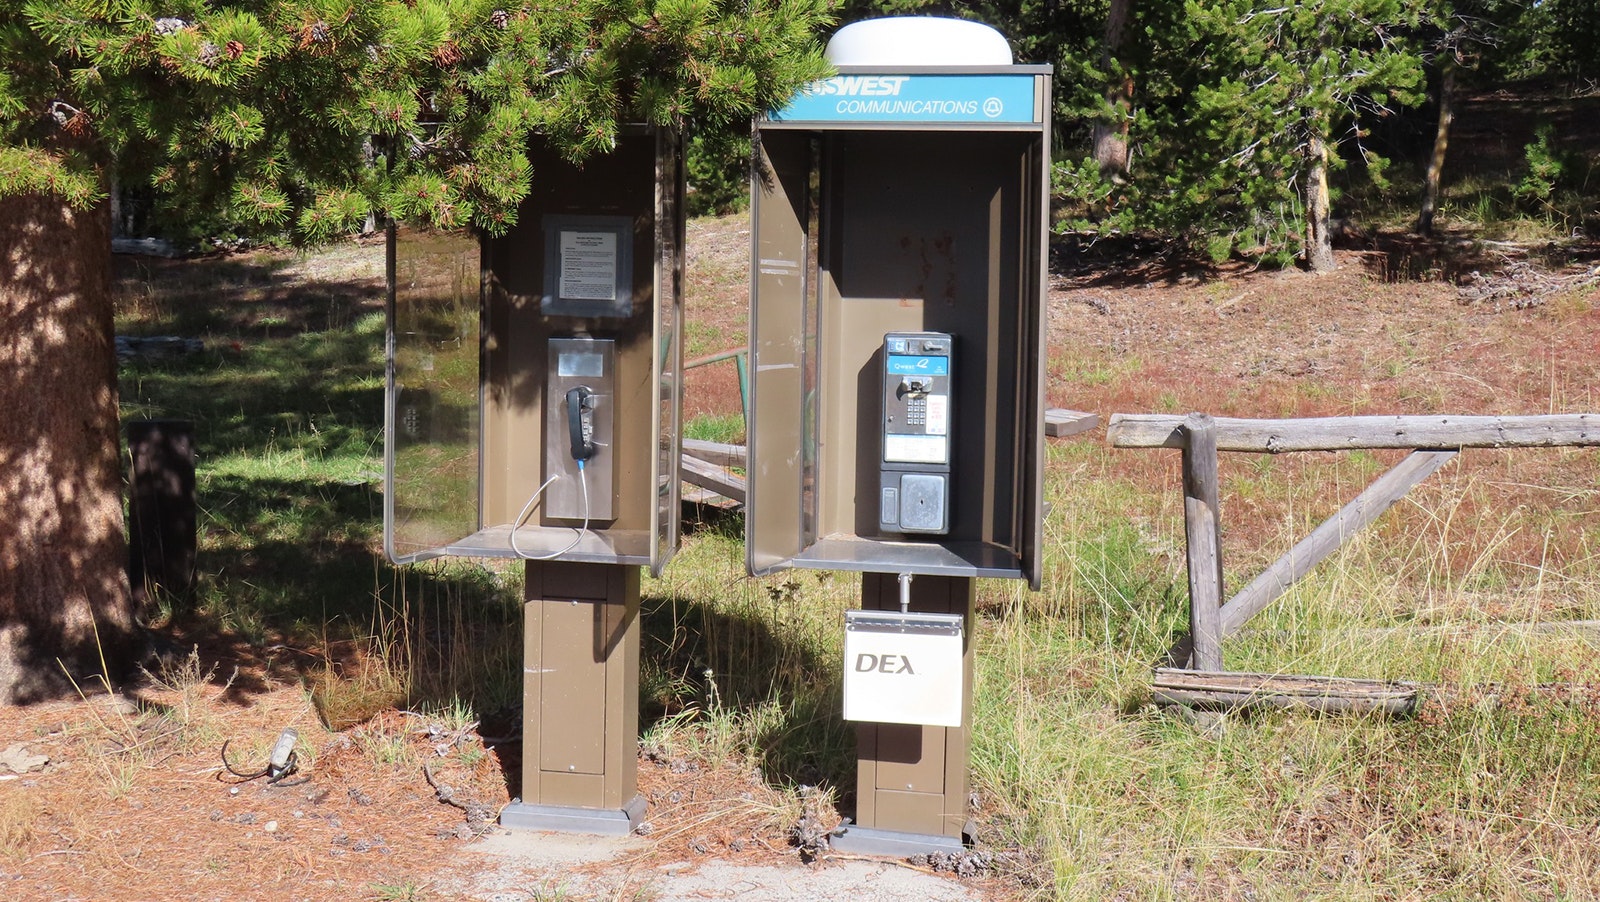 Of these two payphones at the Norris Campground in Yellowstone National Park, one still works.